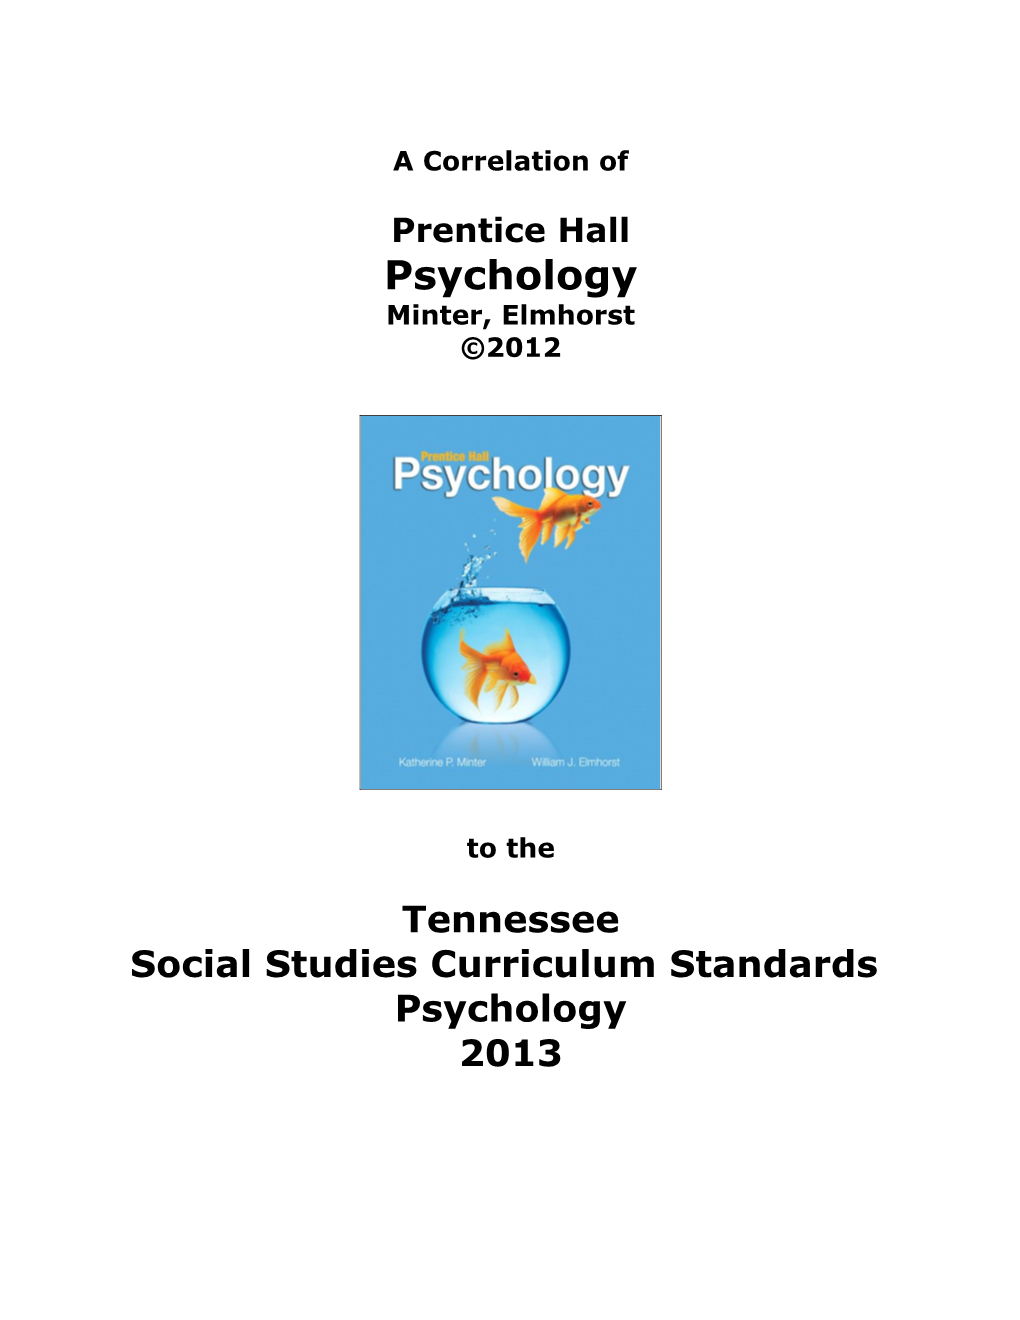 A Correlation of Prentice Hall Psychology, 2012 to the Tennessee Social Studies Curriculum